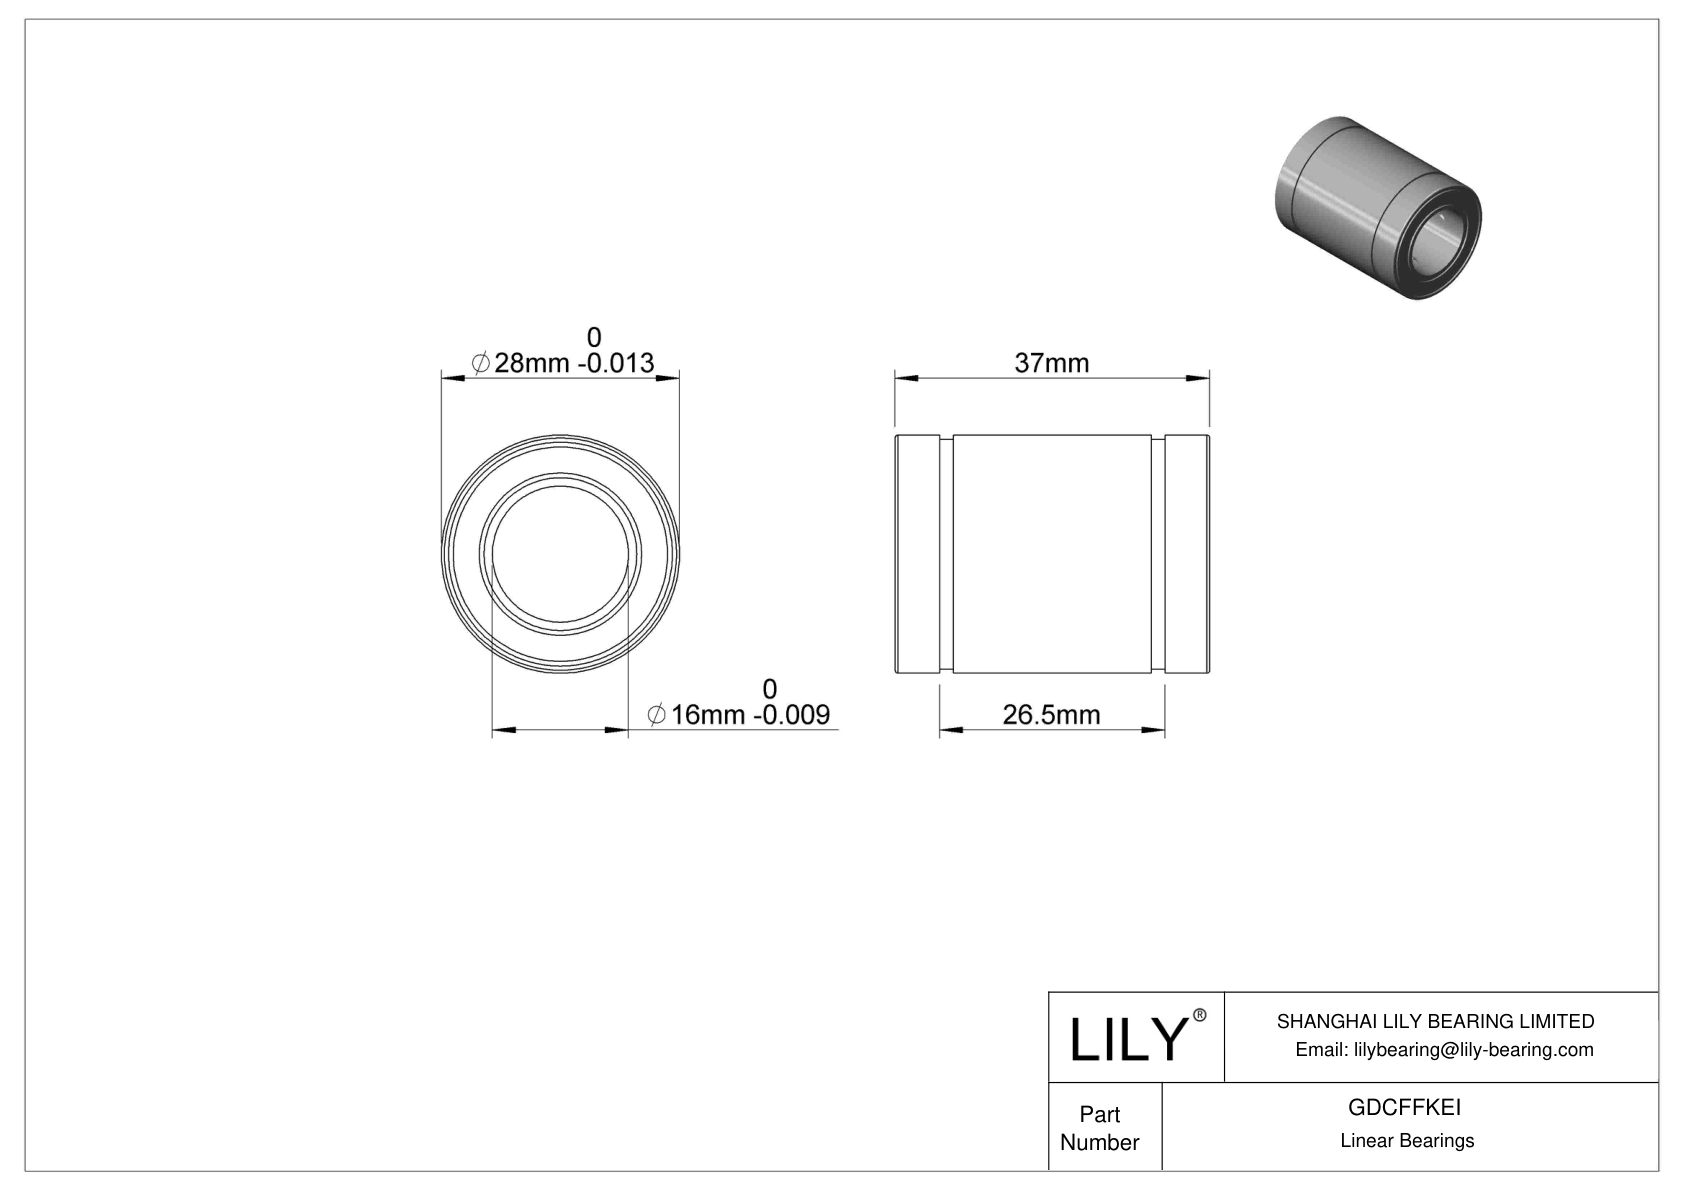 GDCFFKEI High-Temperature Linear Ball Bearings cad drawing